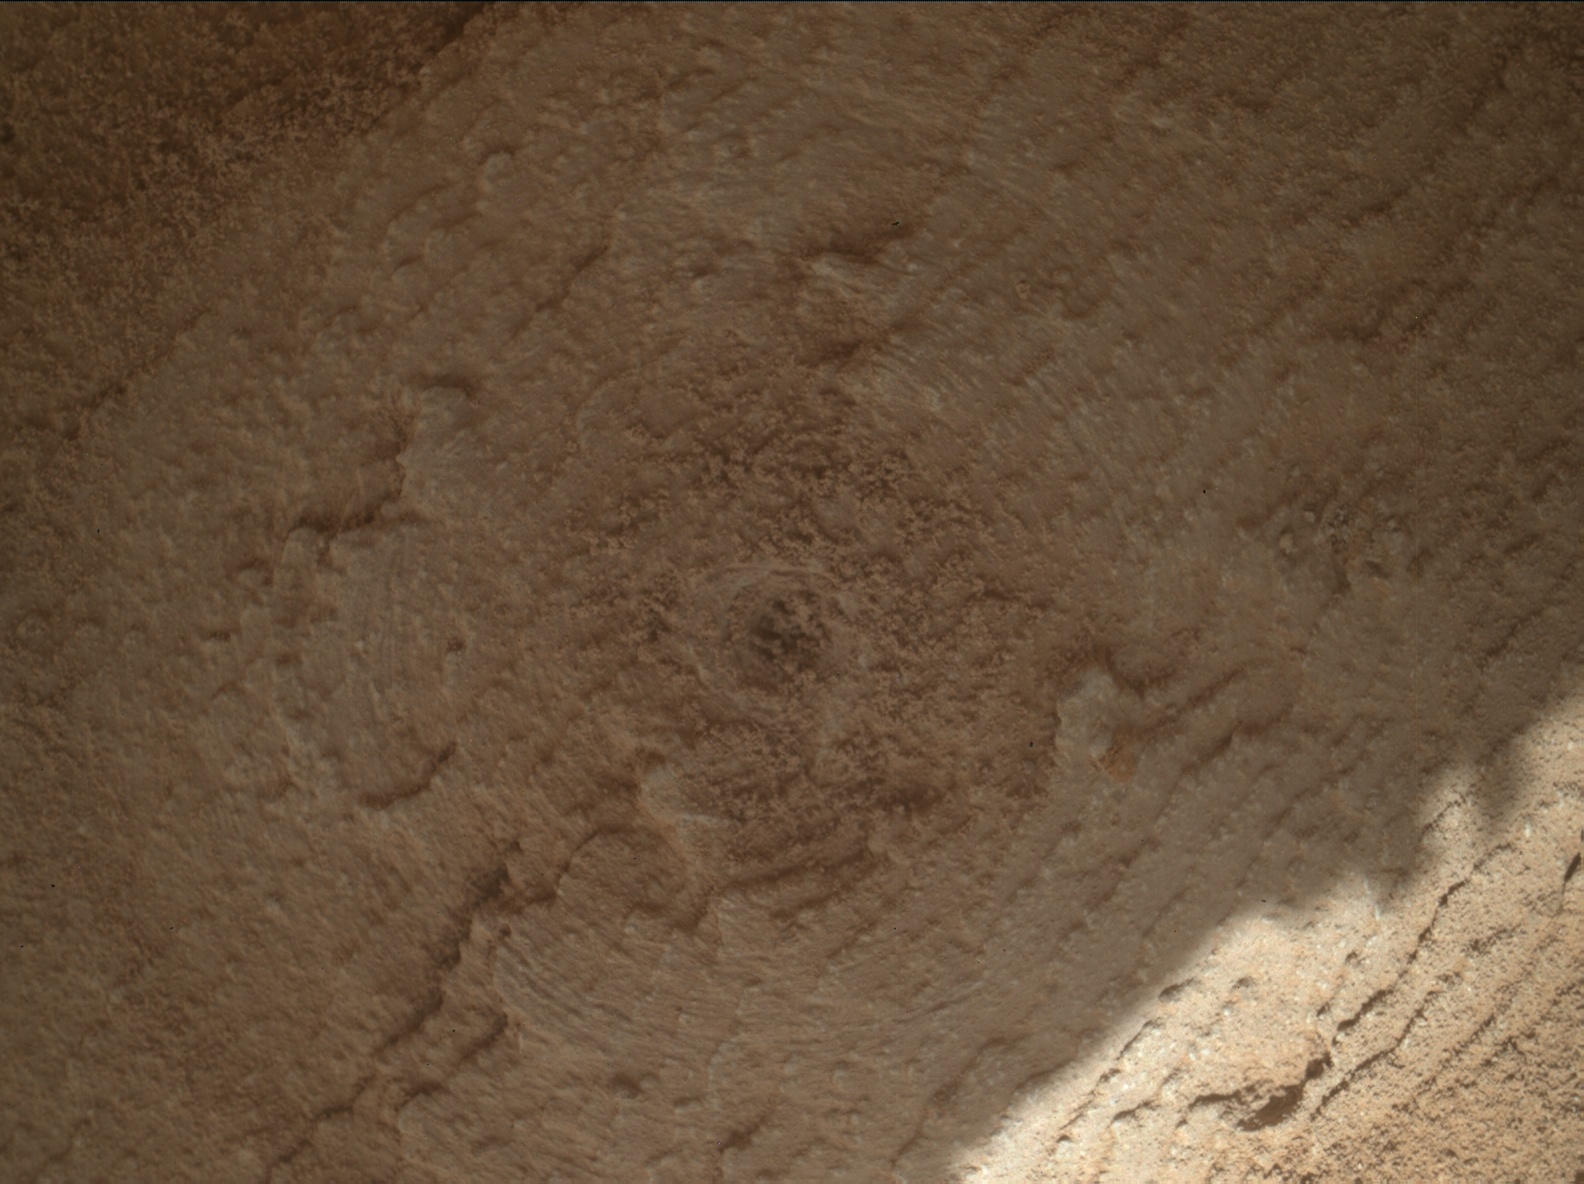 Nasa's Mars rover Curiosity acquired this image using its Mars Hand Lens Imager (MAHLI) on Sol 3851